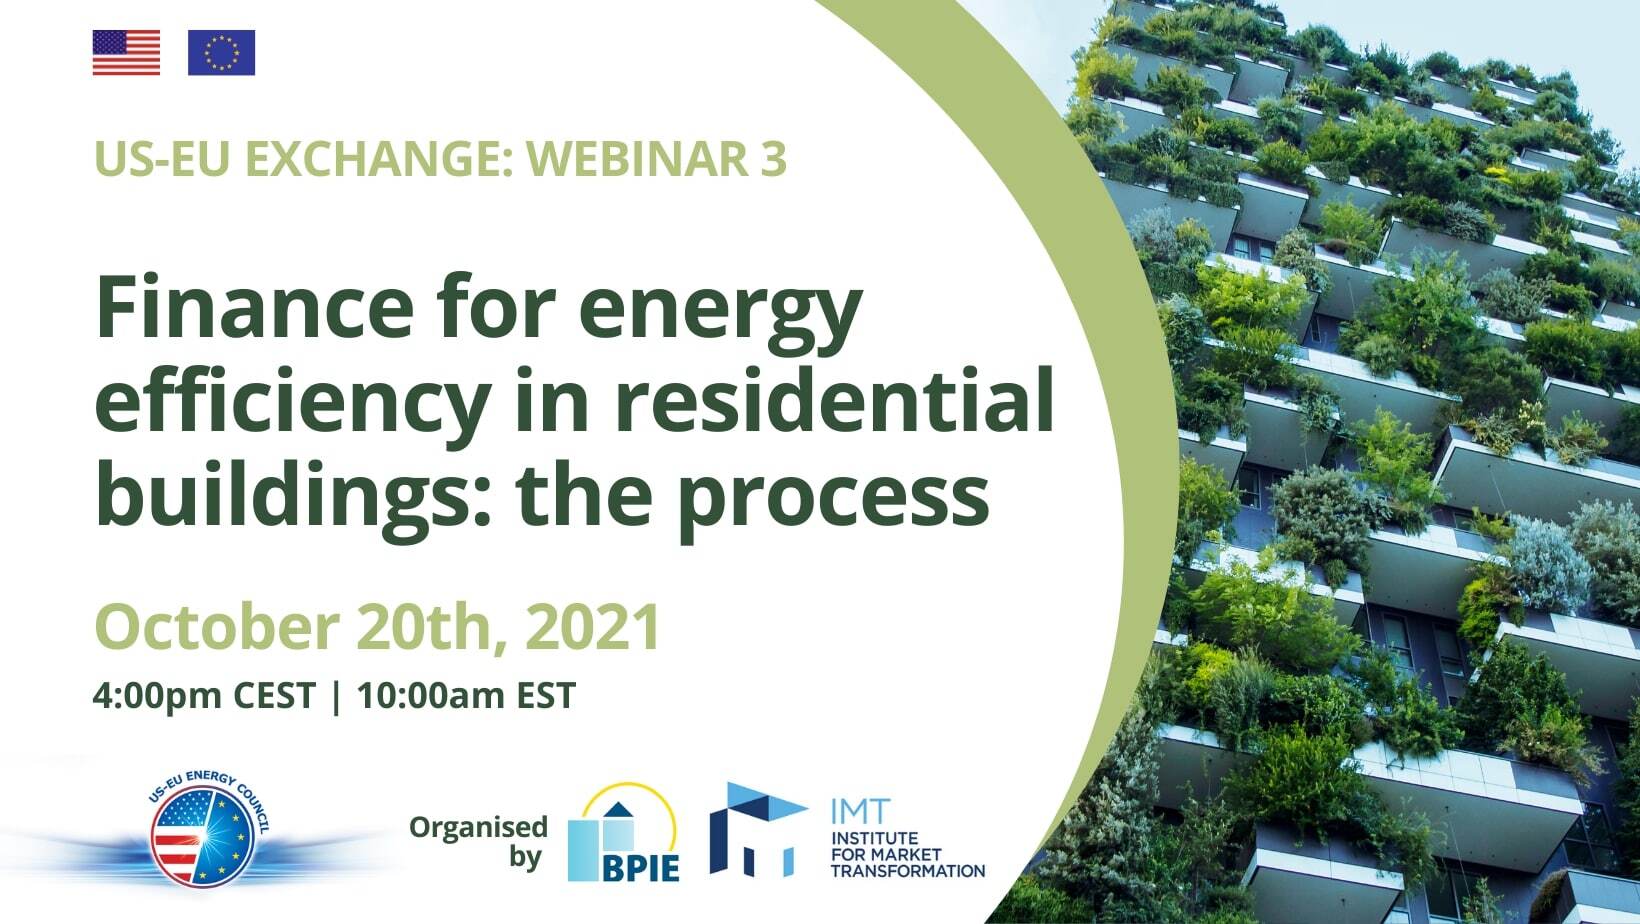 US-EU exchange: Finance for energy efficiency in residential buildings – the process